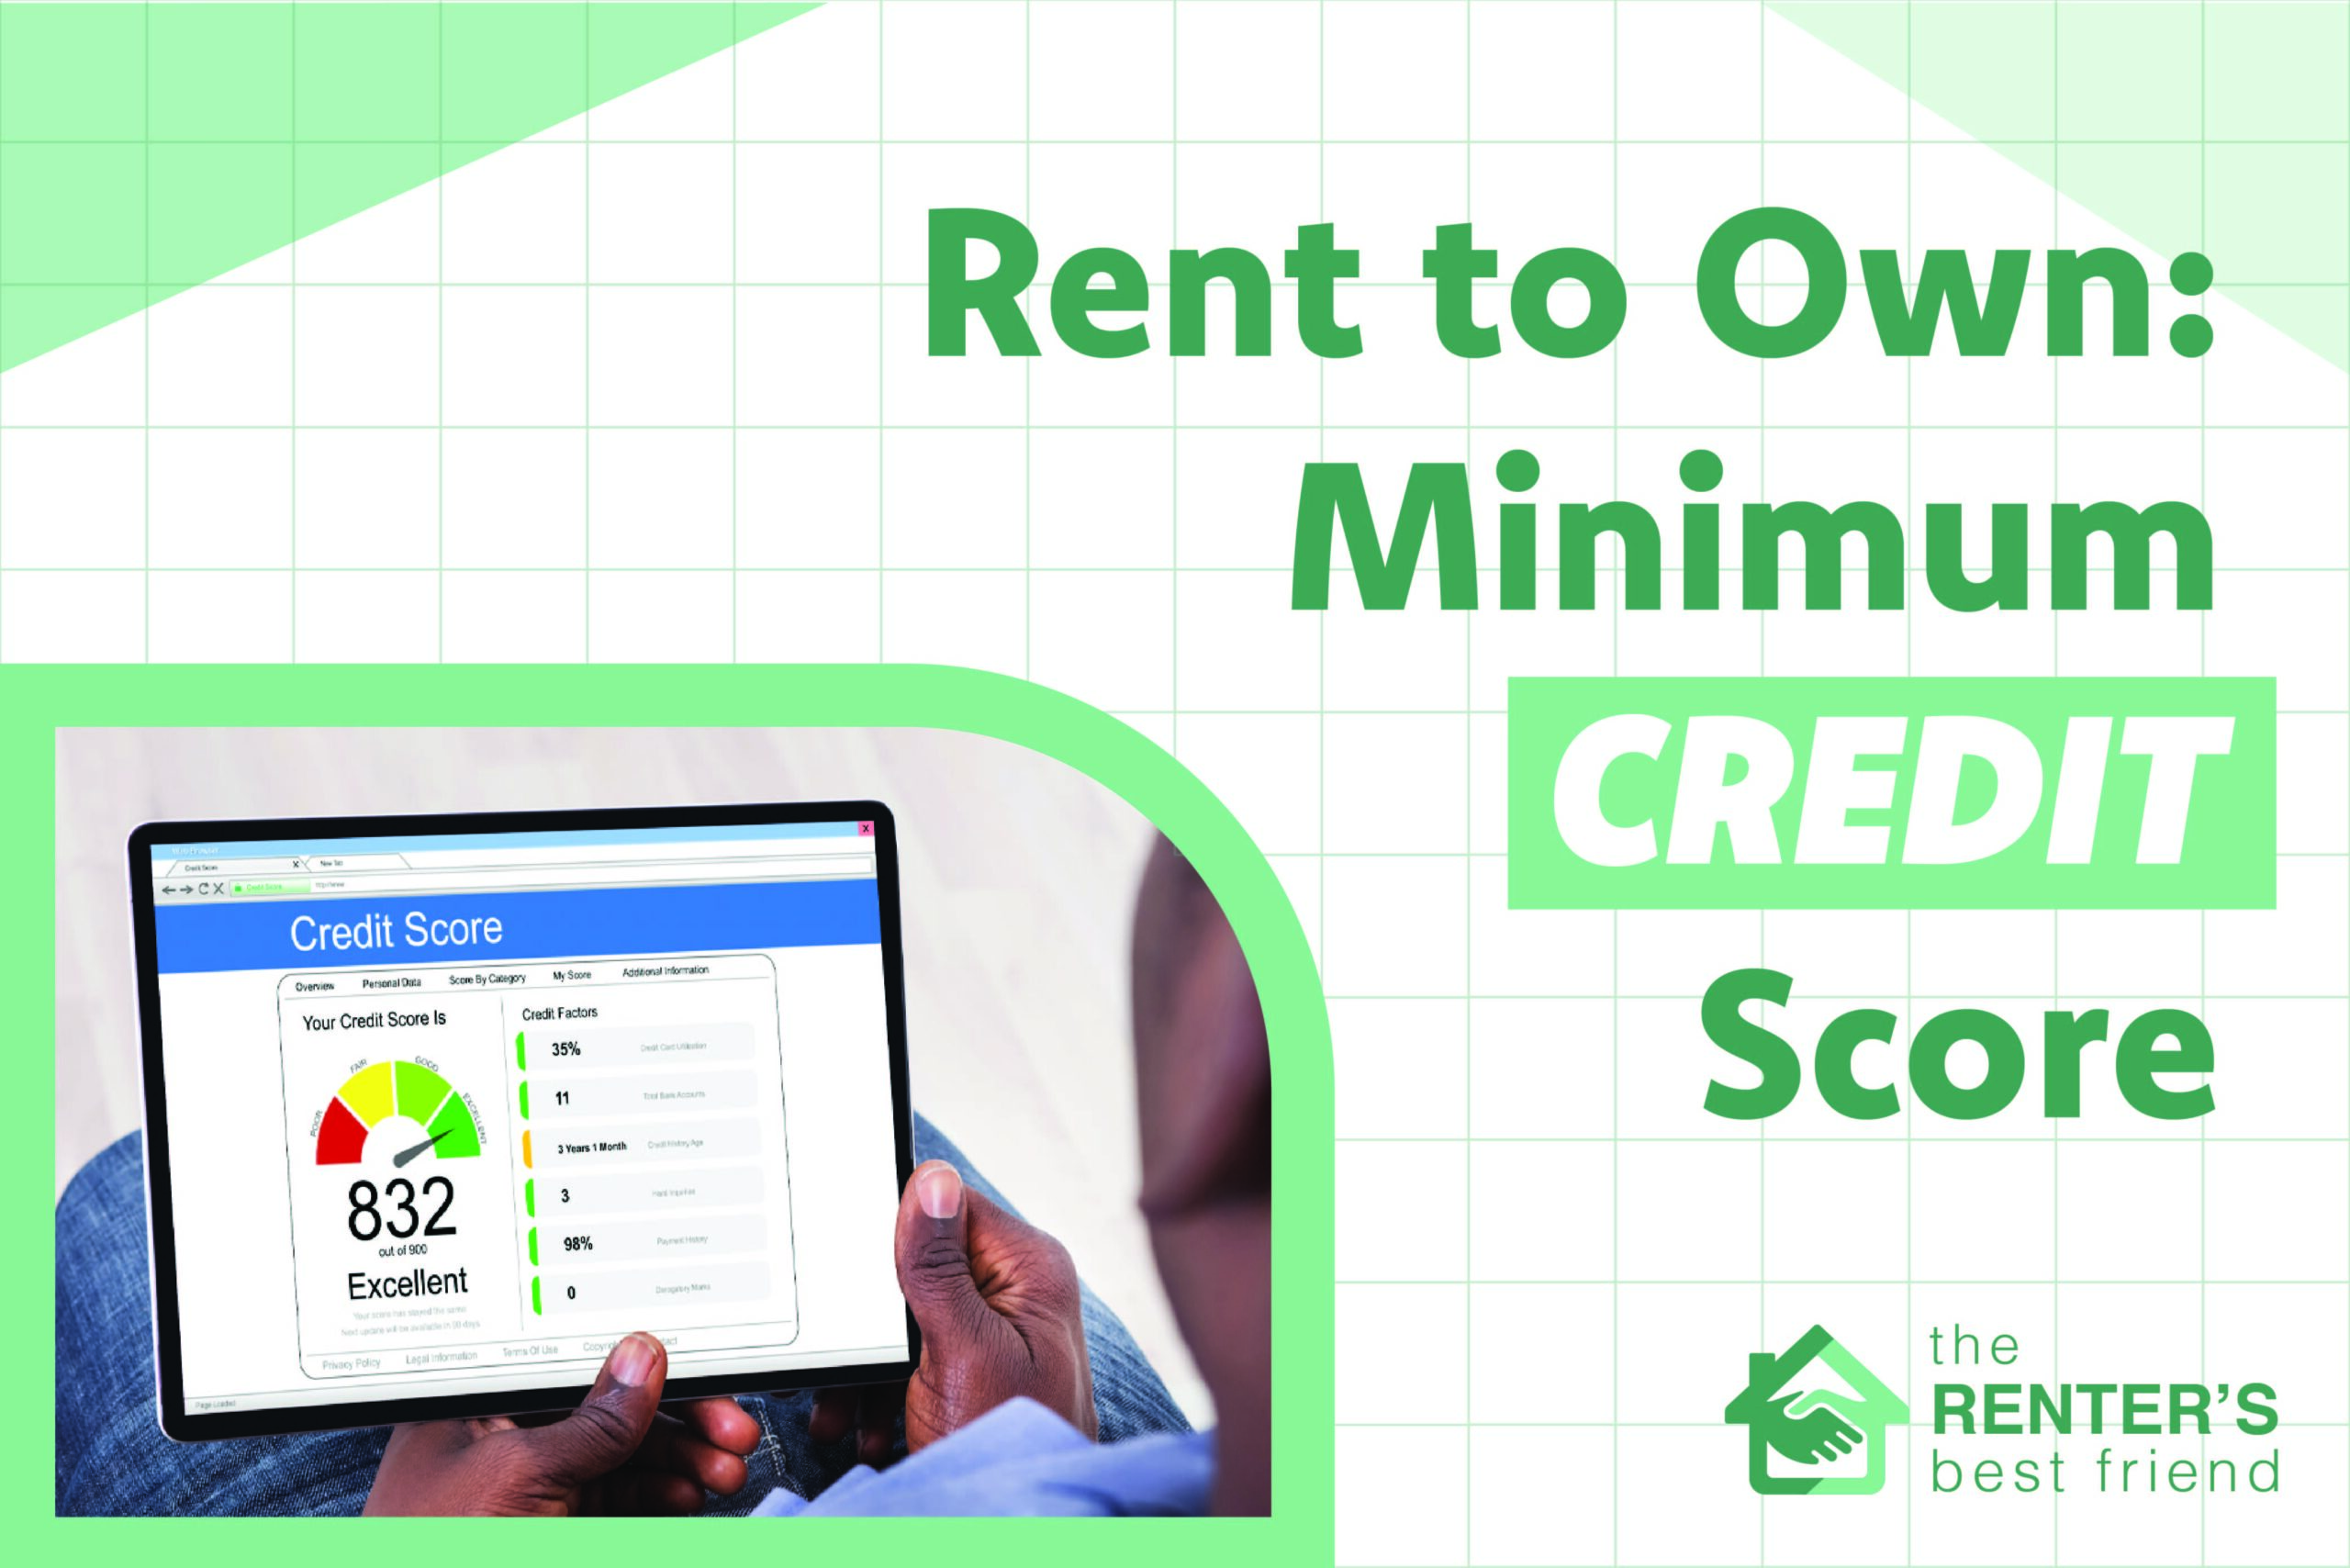 Minimum credit score for a rent to own home?